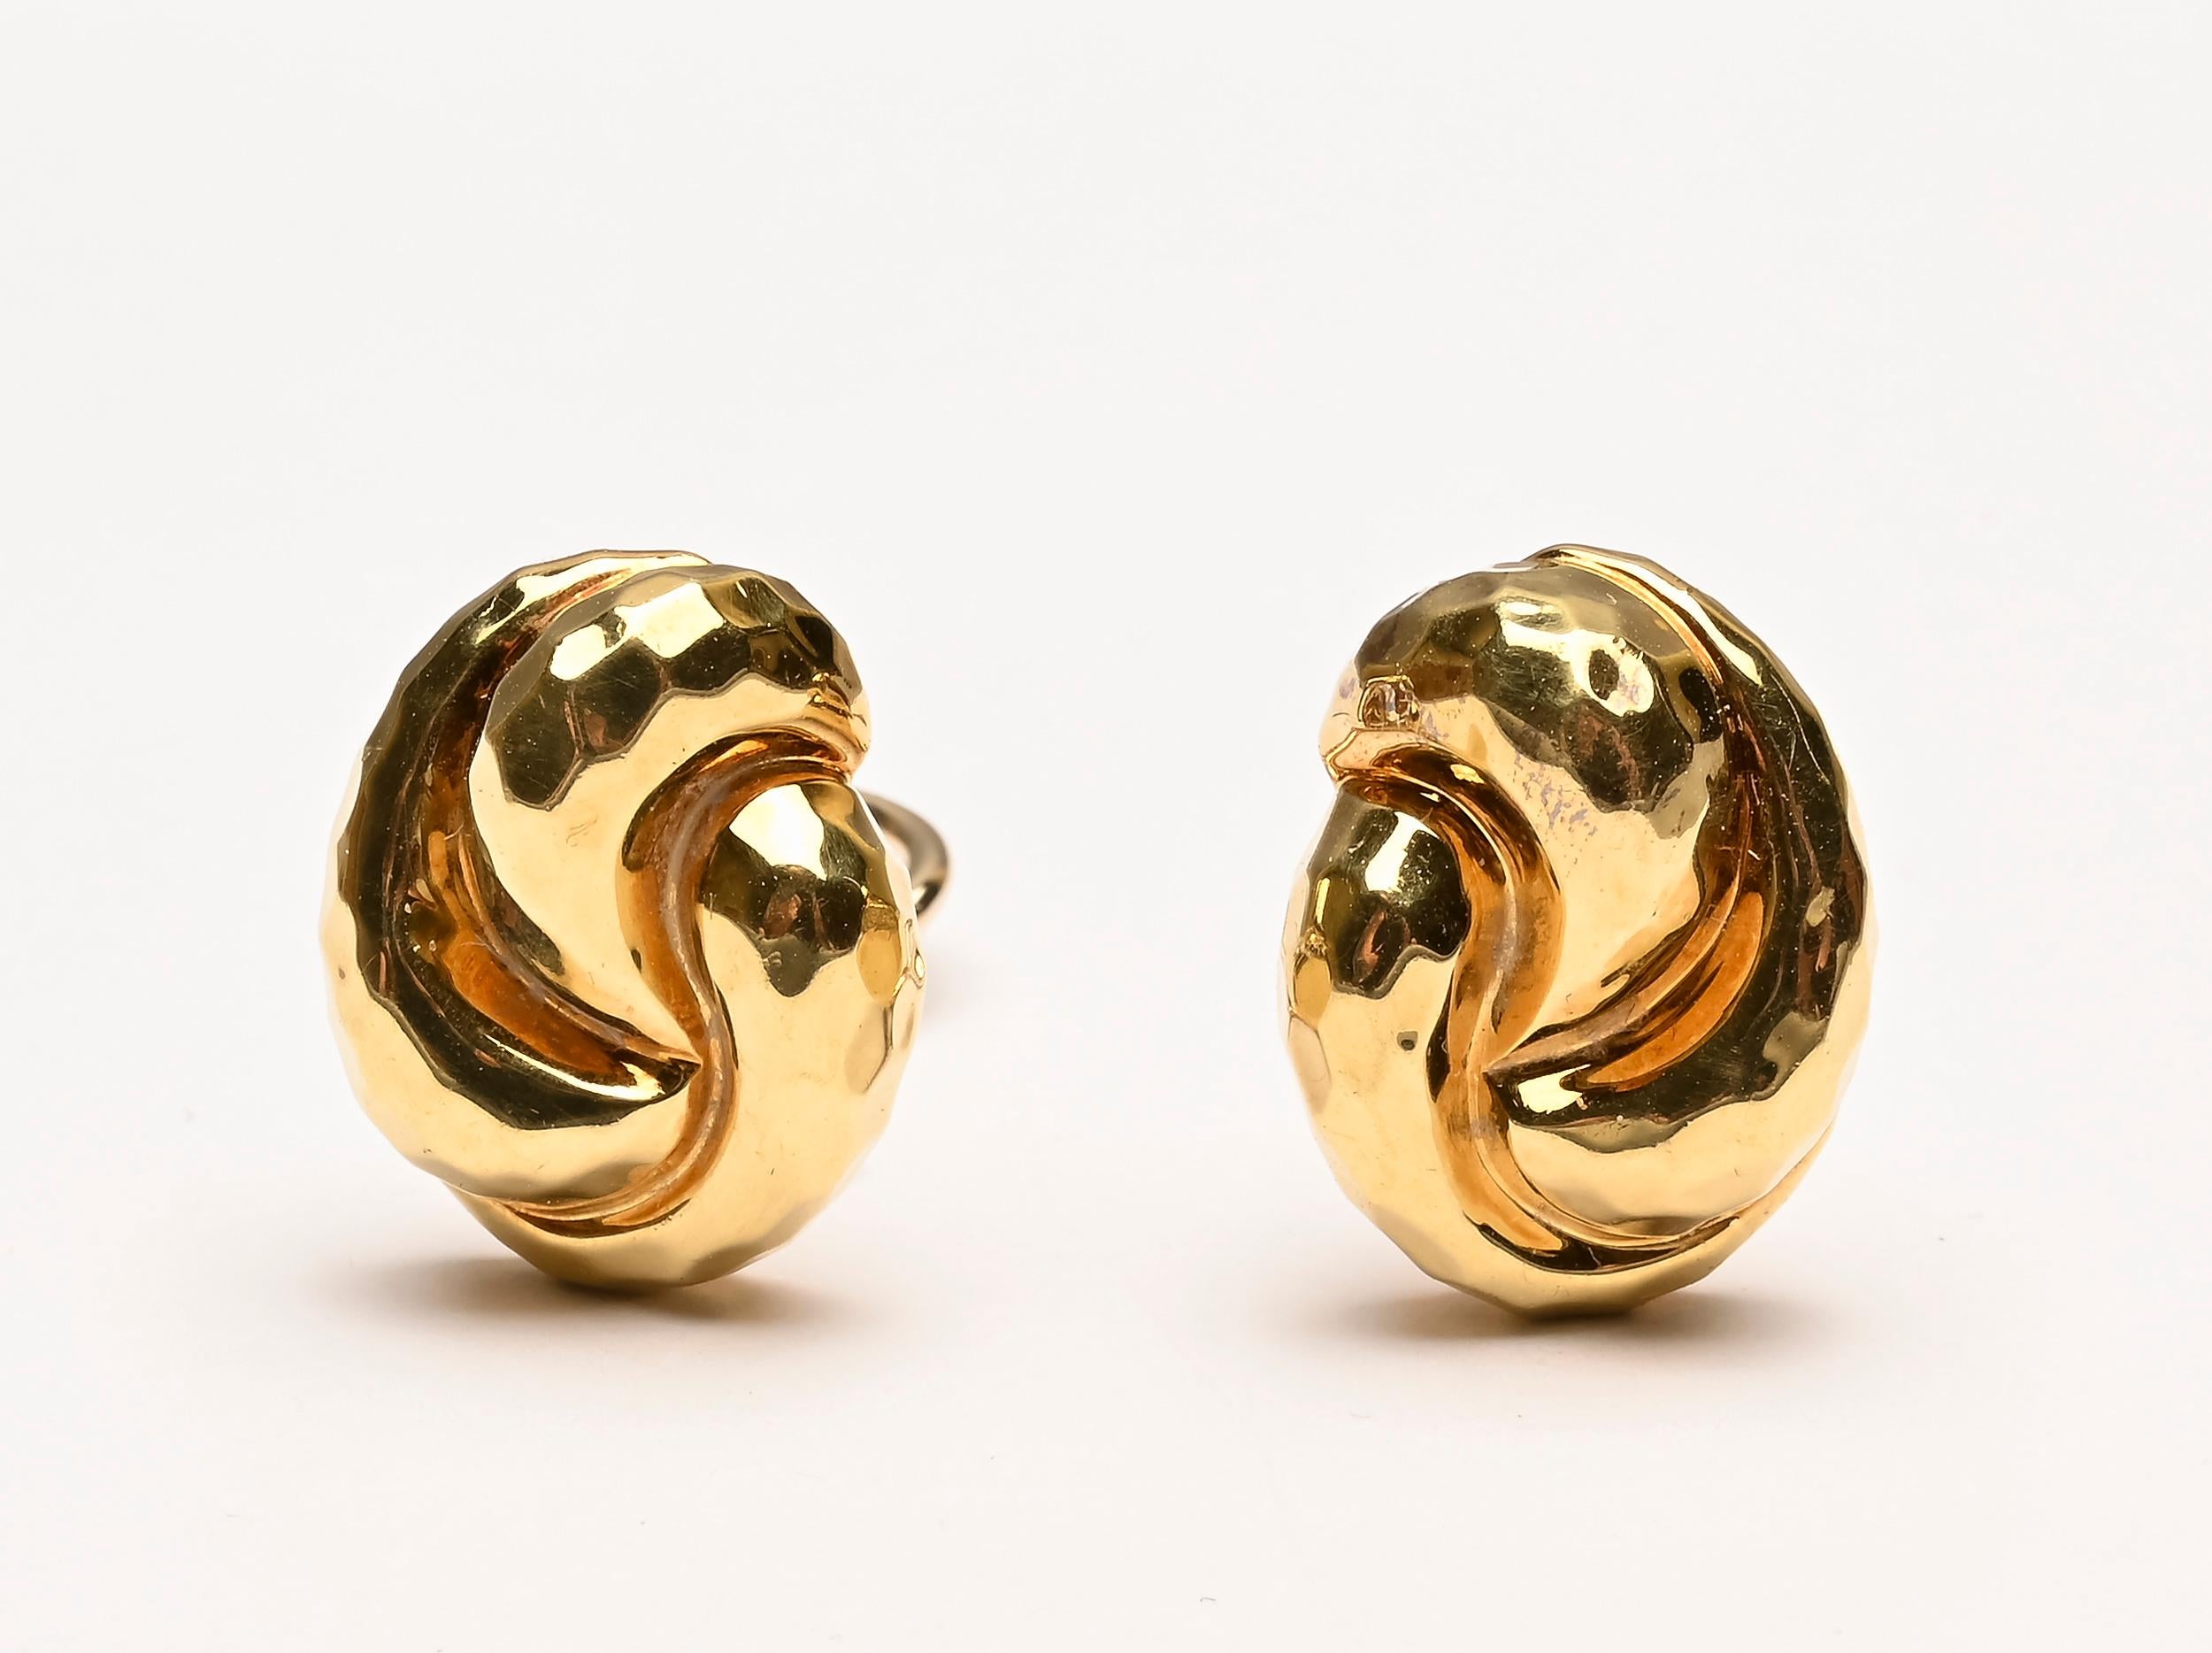 Henry Dunay 18 karat gold knot earrings that are typical of his design but smaller than his usual size. The earrings measure half an inch wide by 9/16 inch long. They are done with the hammered gold that is one of Dunay's signature finishes. Backs